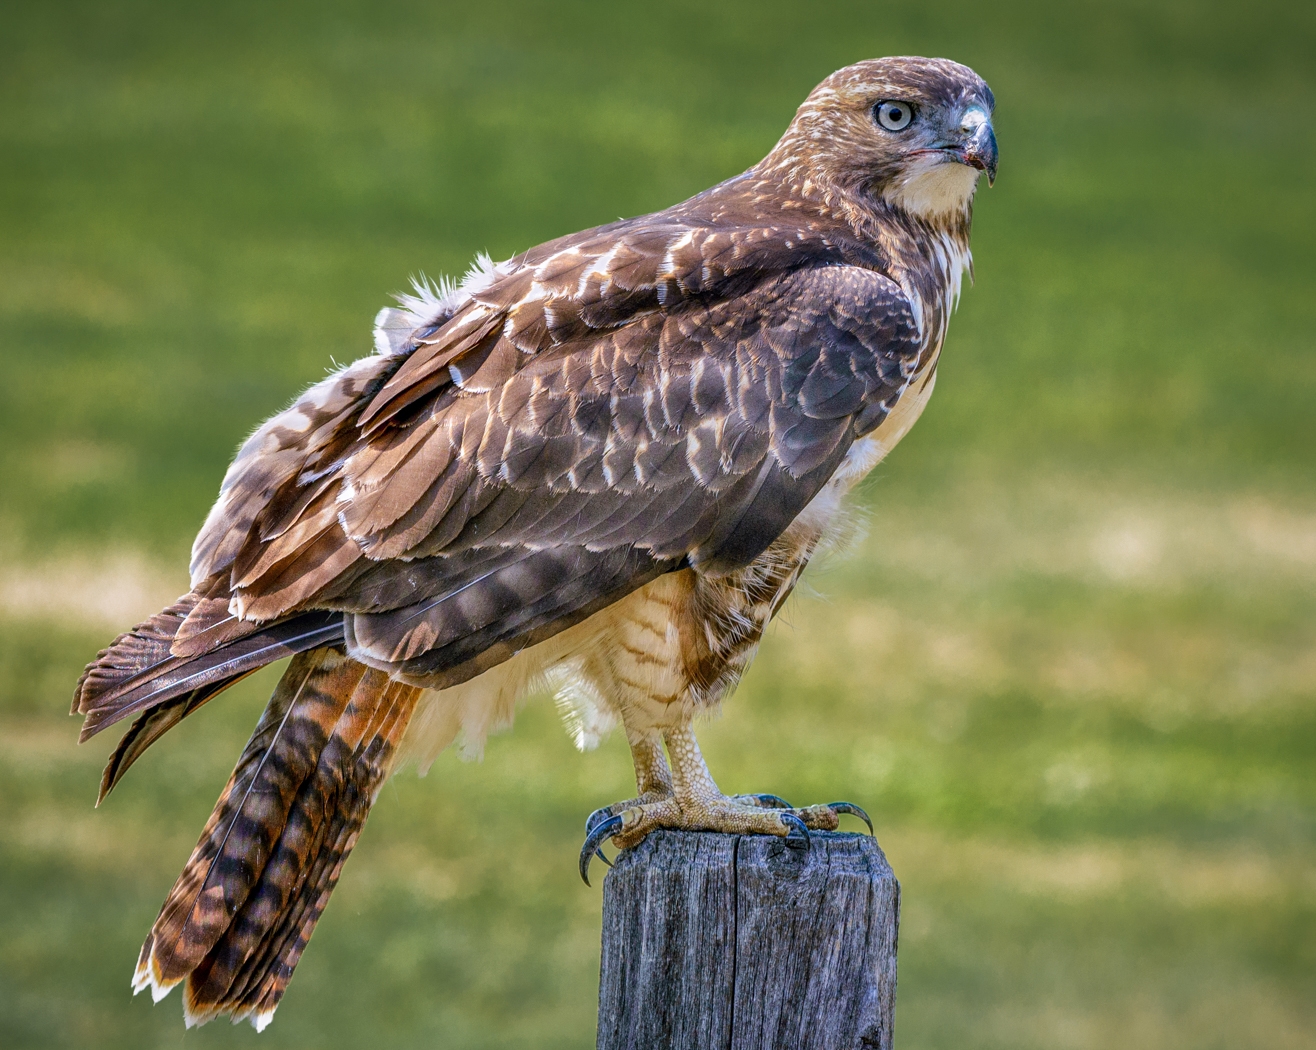 Red Tailed Hawk posing by Bill Payne